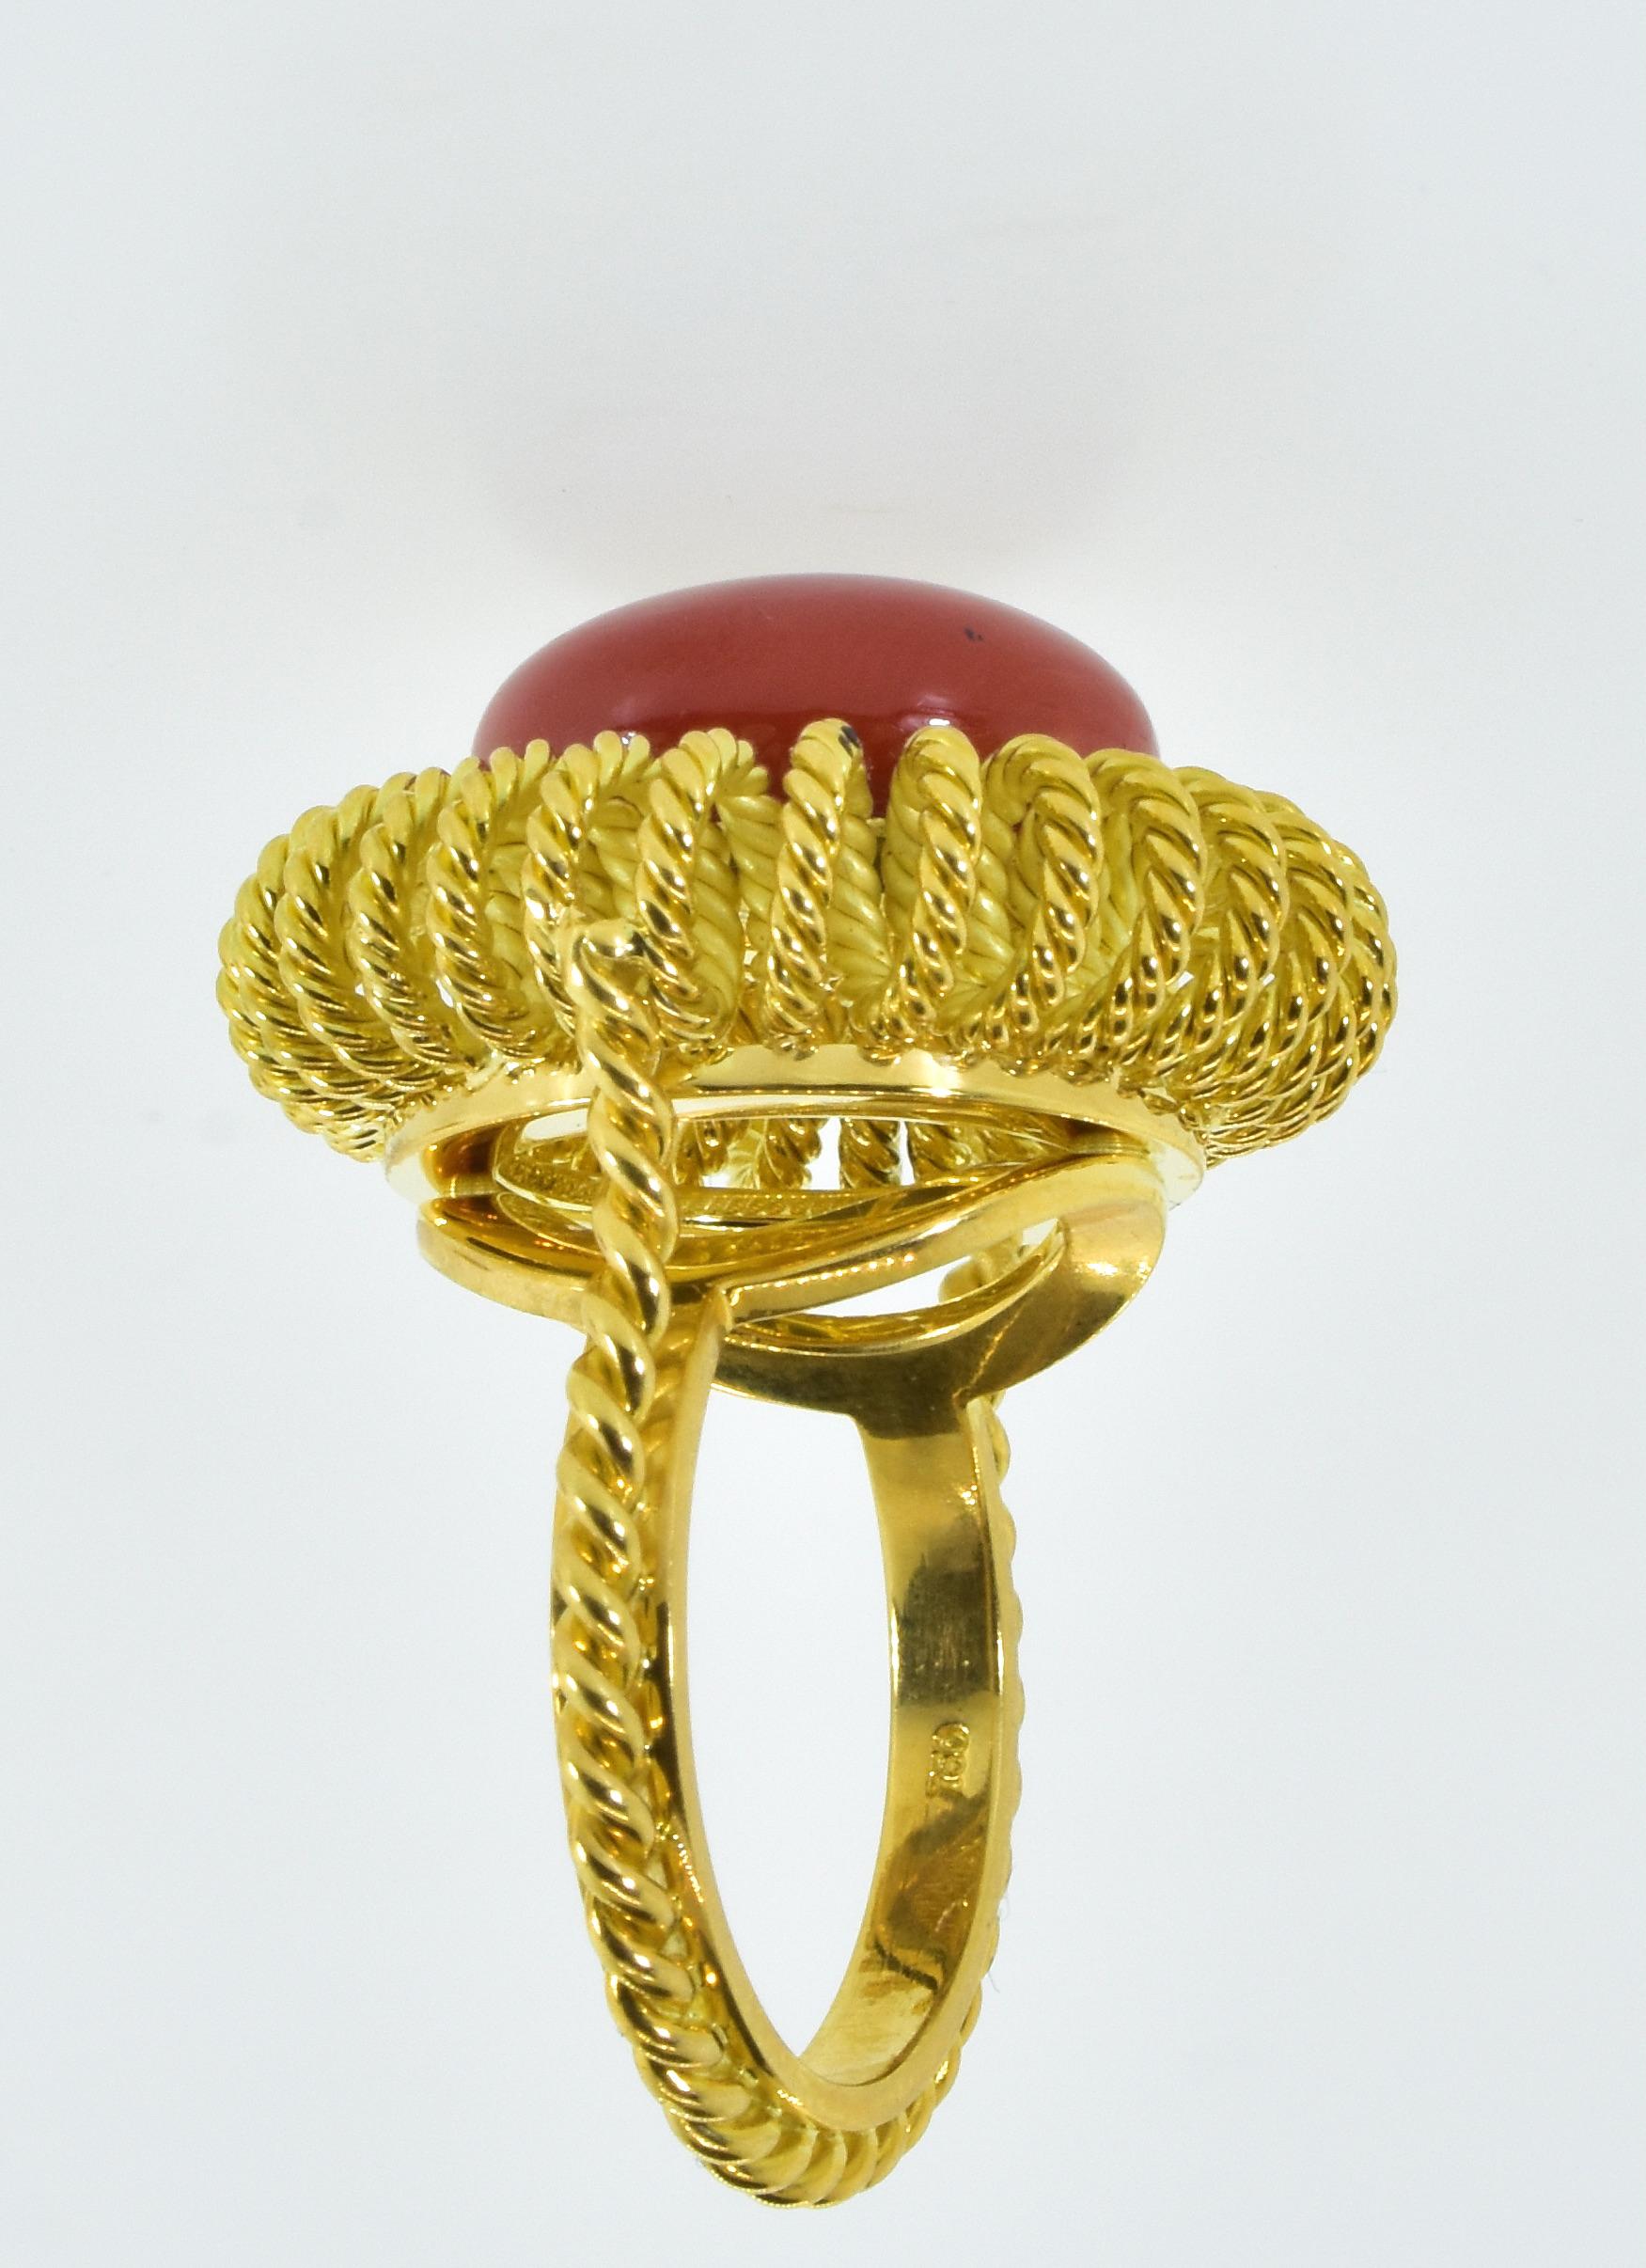 Red Mediterranean Oxblood Coral Earrings & 18K Ring, C. 1950 For Sale 4